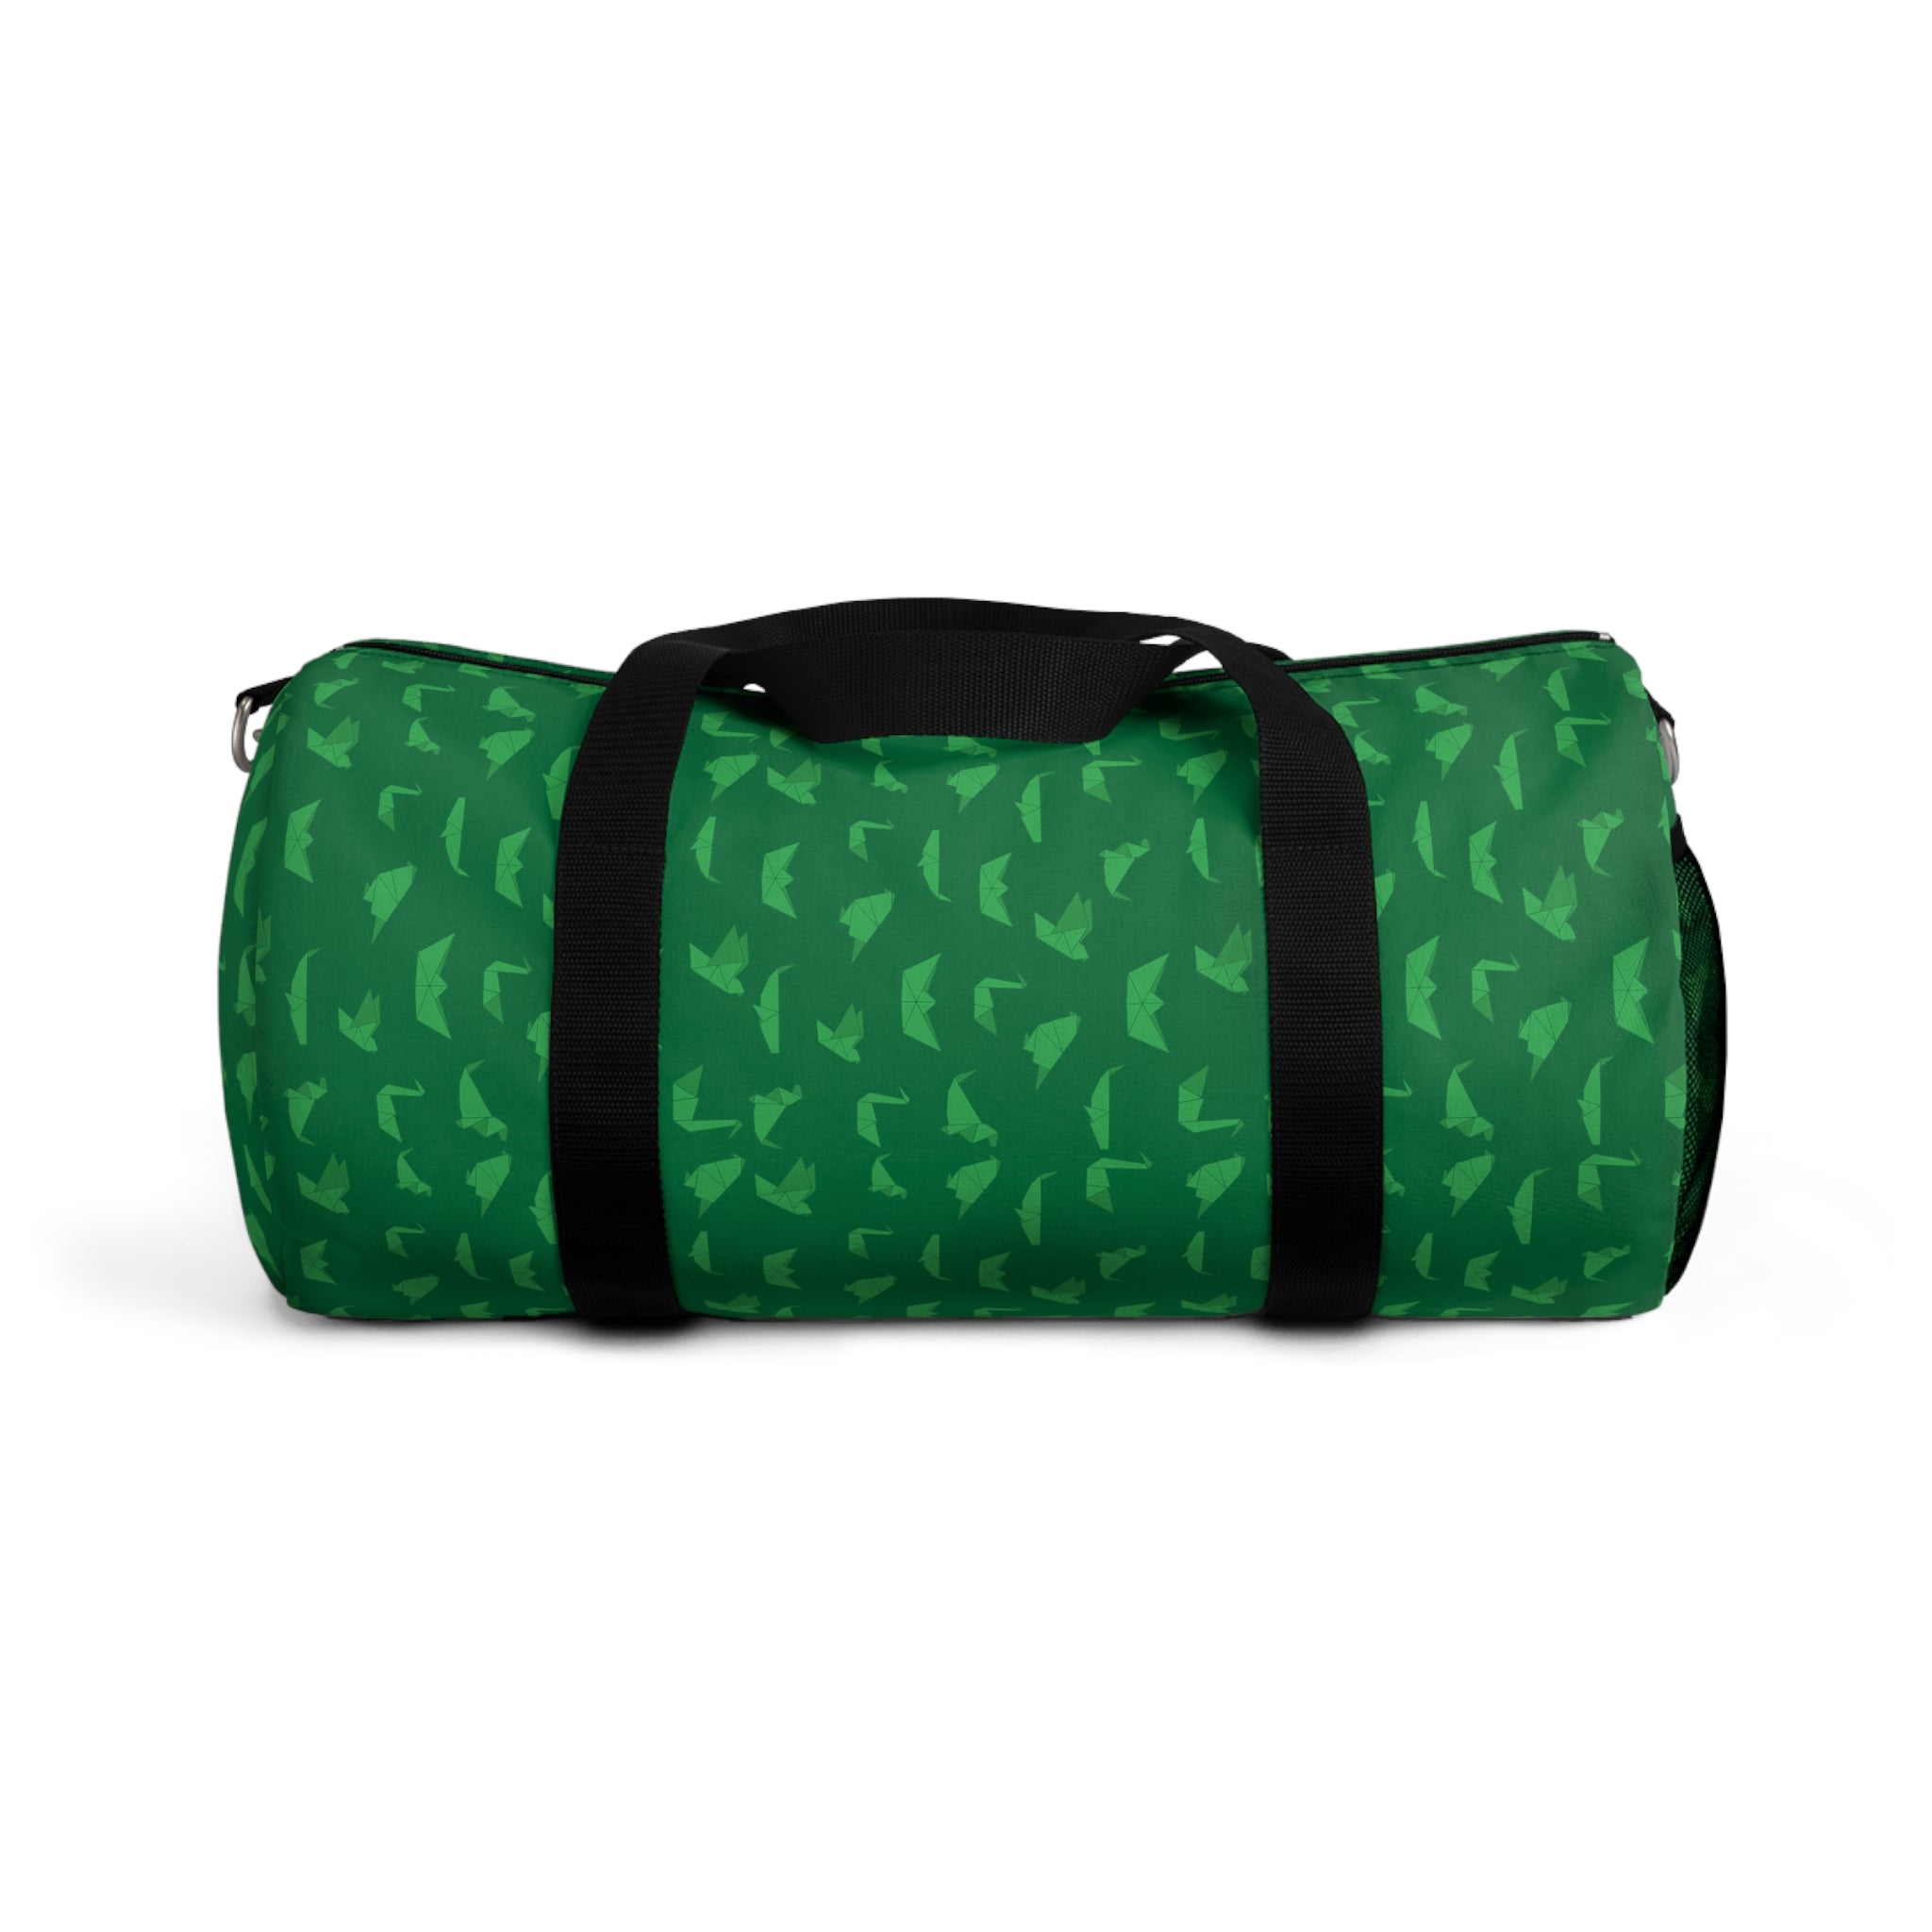 Green Crane Print Duffel Bag, Green Japanese Crane Print Pattern Print Designer Premium All Day Small Or Large Size Duffel or Gym Bag, Made in USA, Womens Large Patterned Duffle Bag, Gym Bag For Ladies, Patterned Duffle Bag